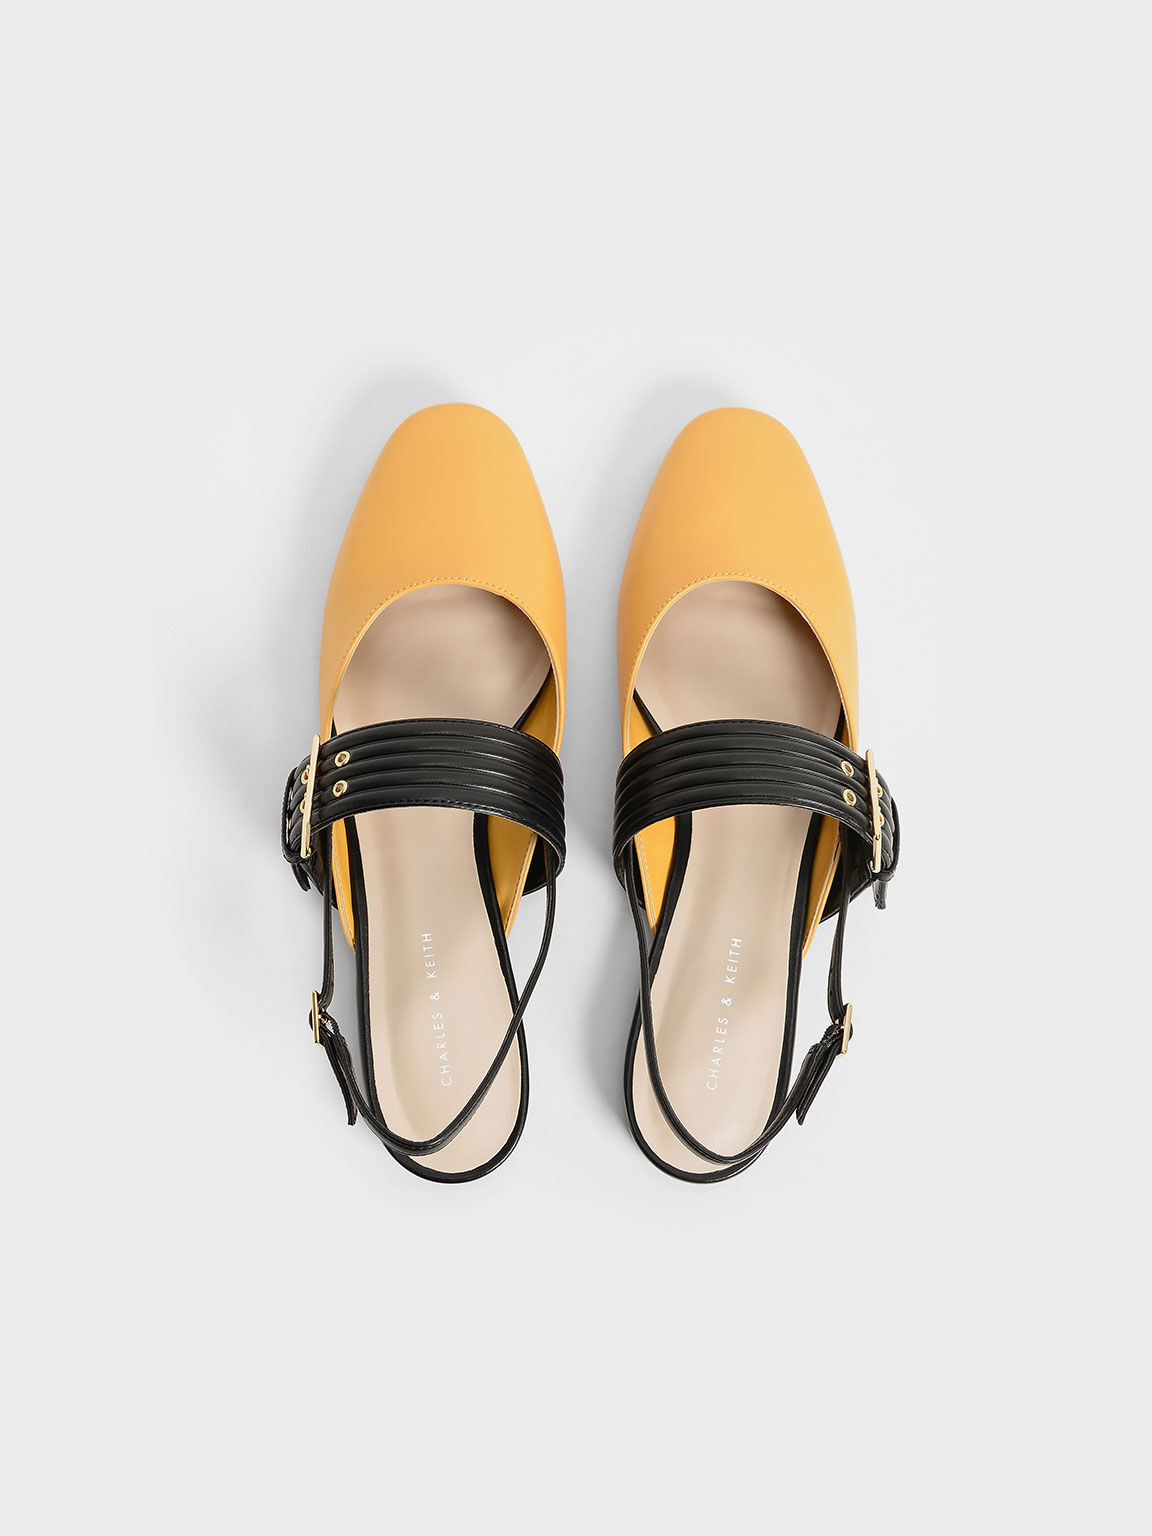 Grommet Strap Slingback Mary Janes, Yellow, hi-res